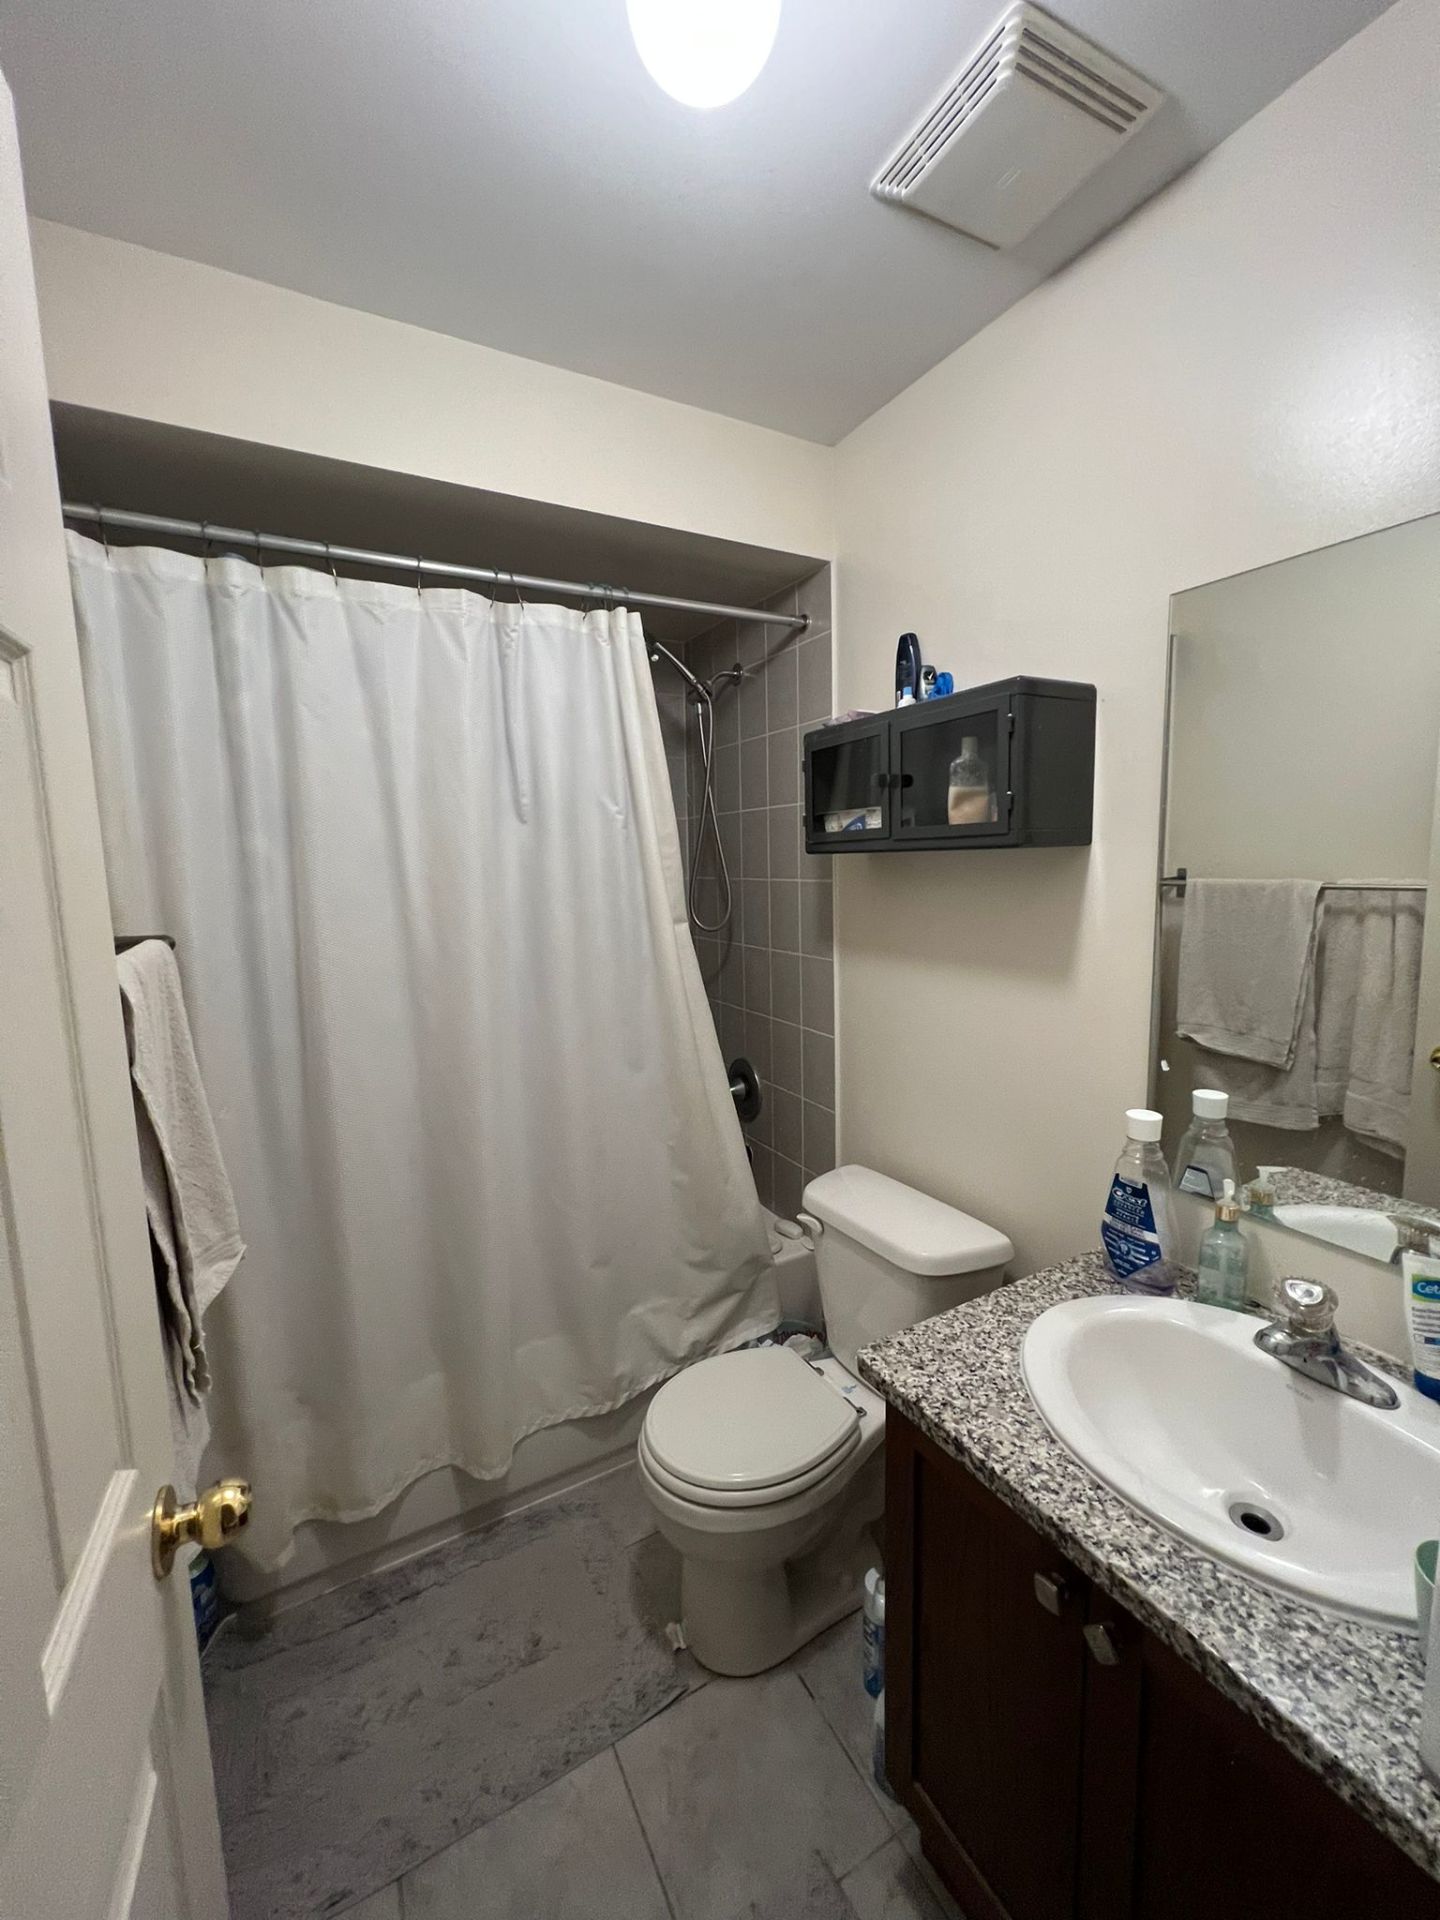 Premium Homestay Room - Torbarrie Rd, North York room for rent 57